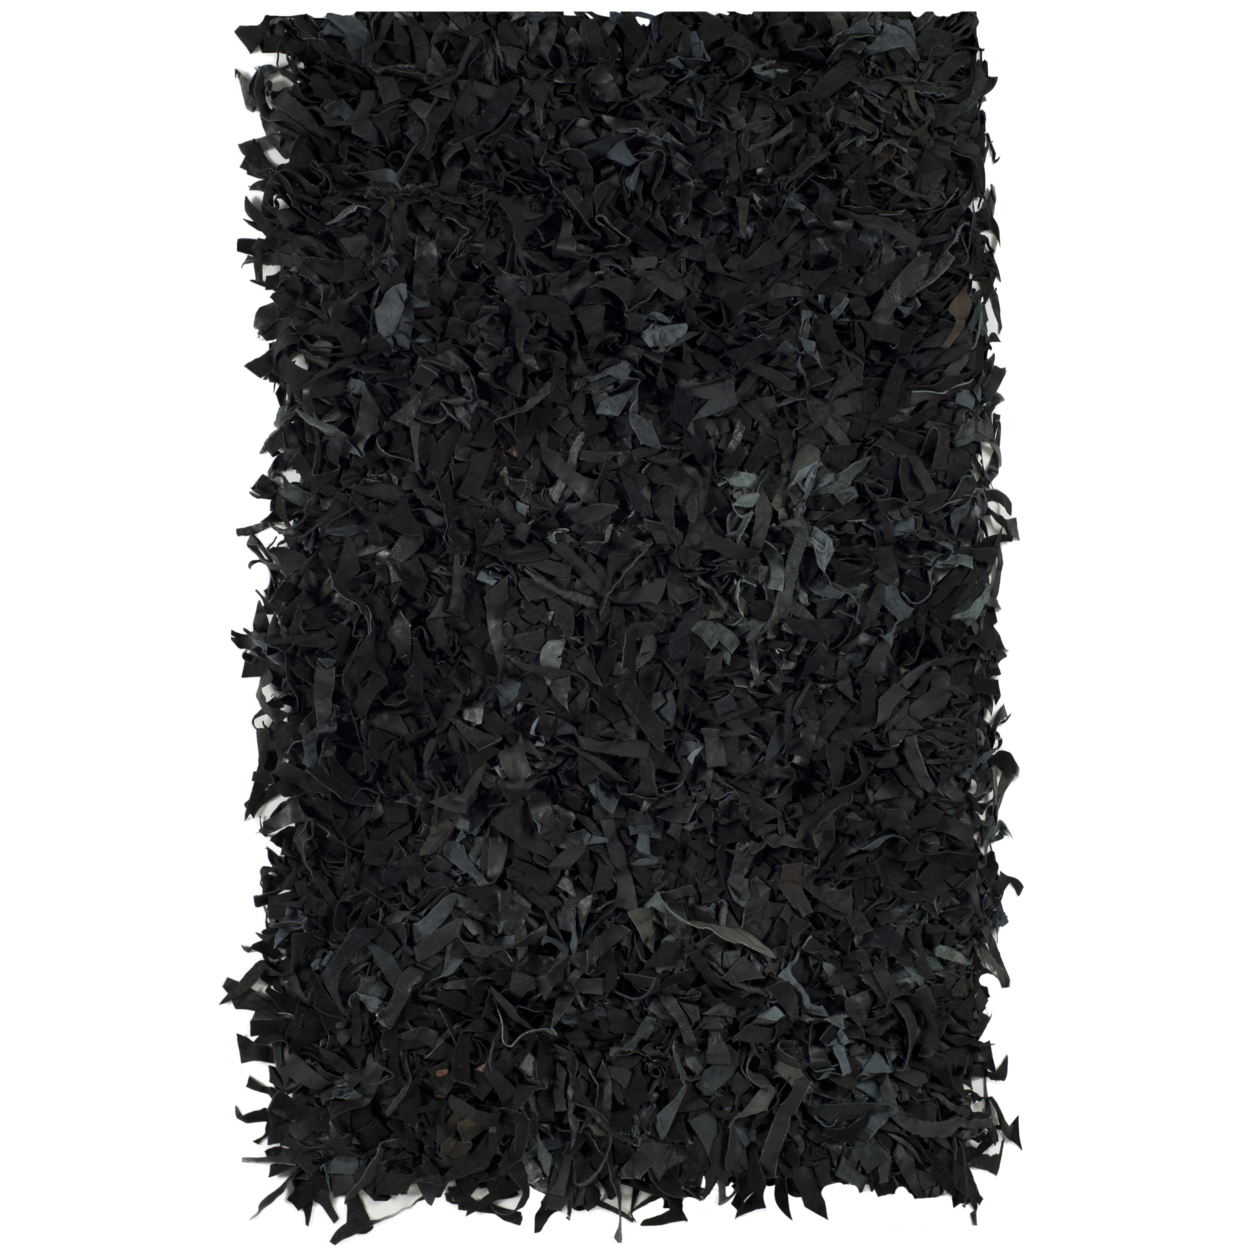 SAFAVIEH Leather Shag LSG511A Hand-knotted Black Rug - 2' X 3'